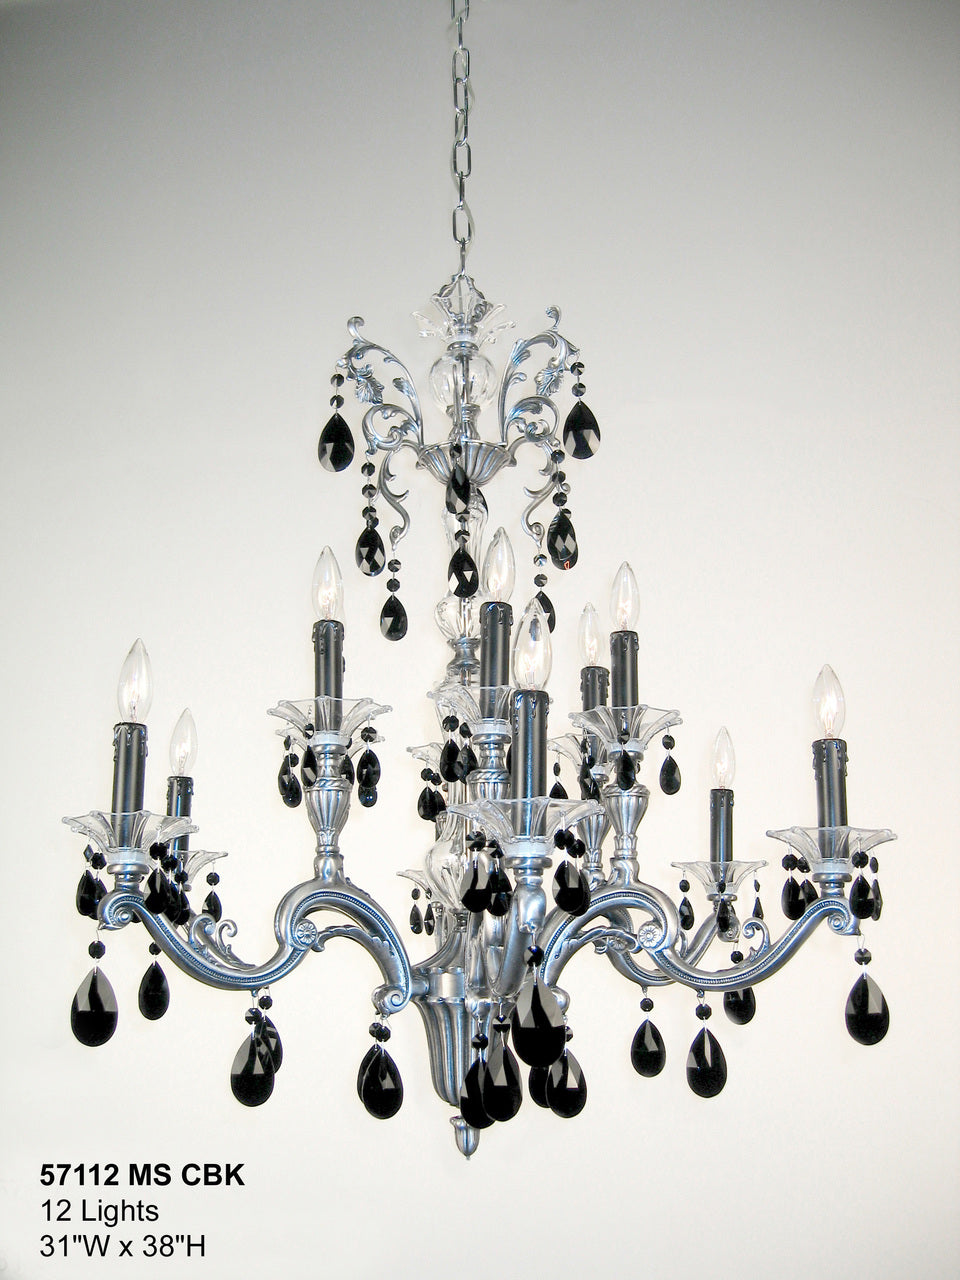 Classic Lighting 57112 MS CBK Via Firenze Crystal Chandelier in Millennium Silver (Imported from Spain)